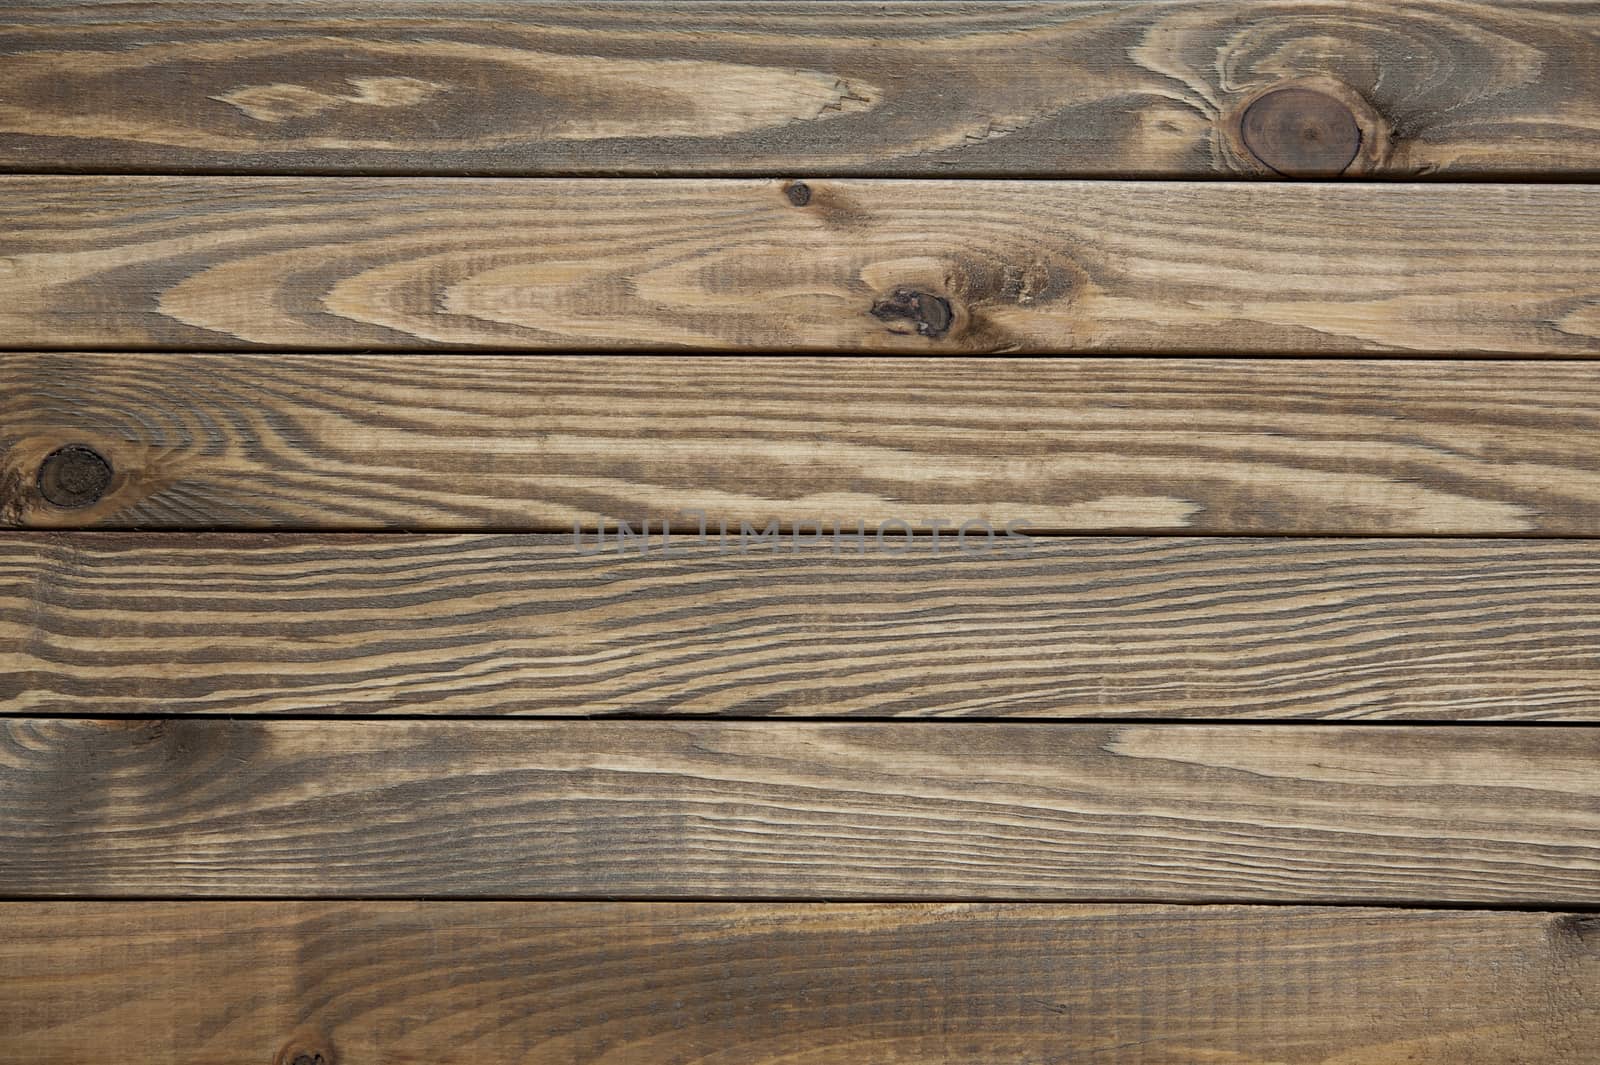 Rustic wood natural background